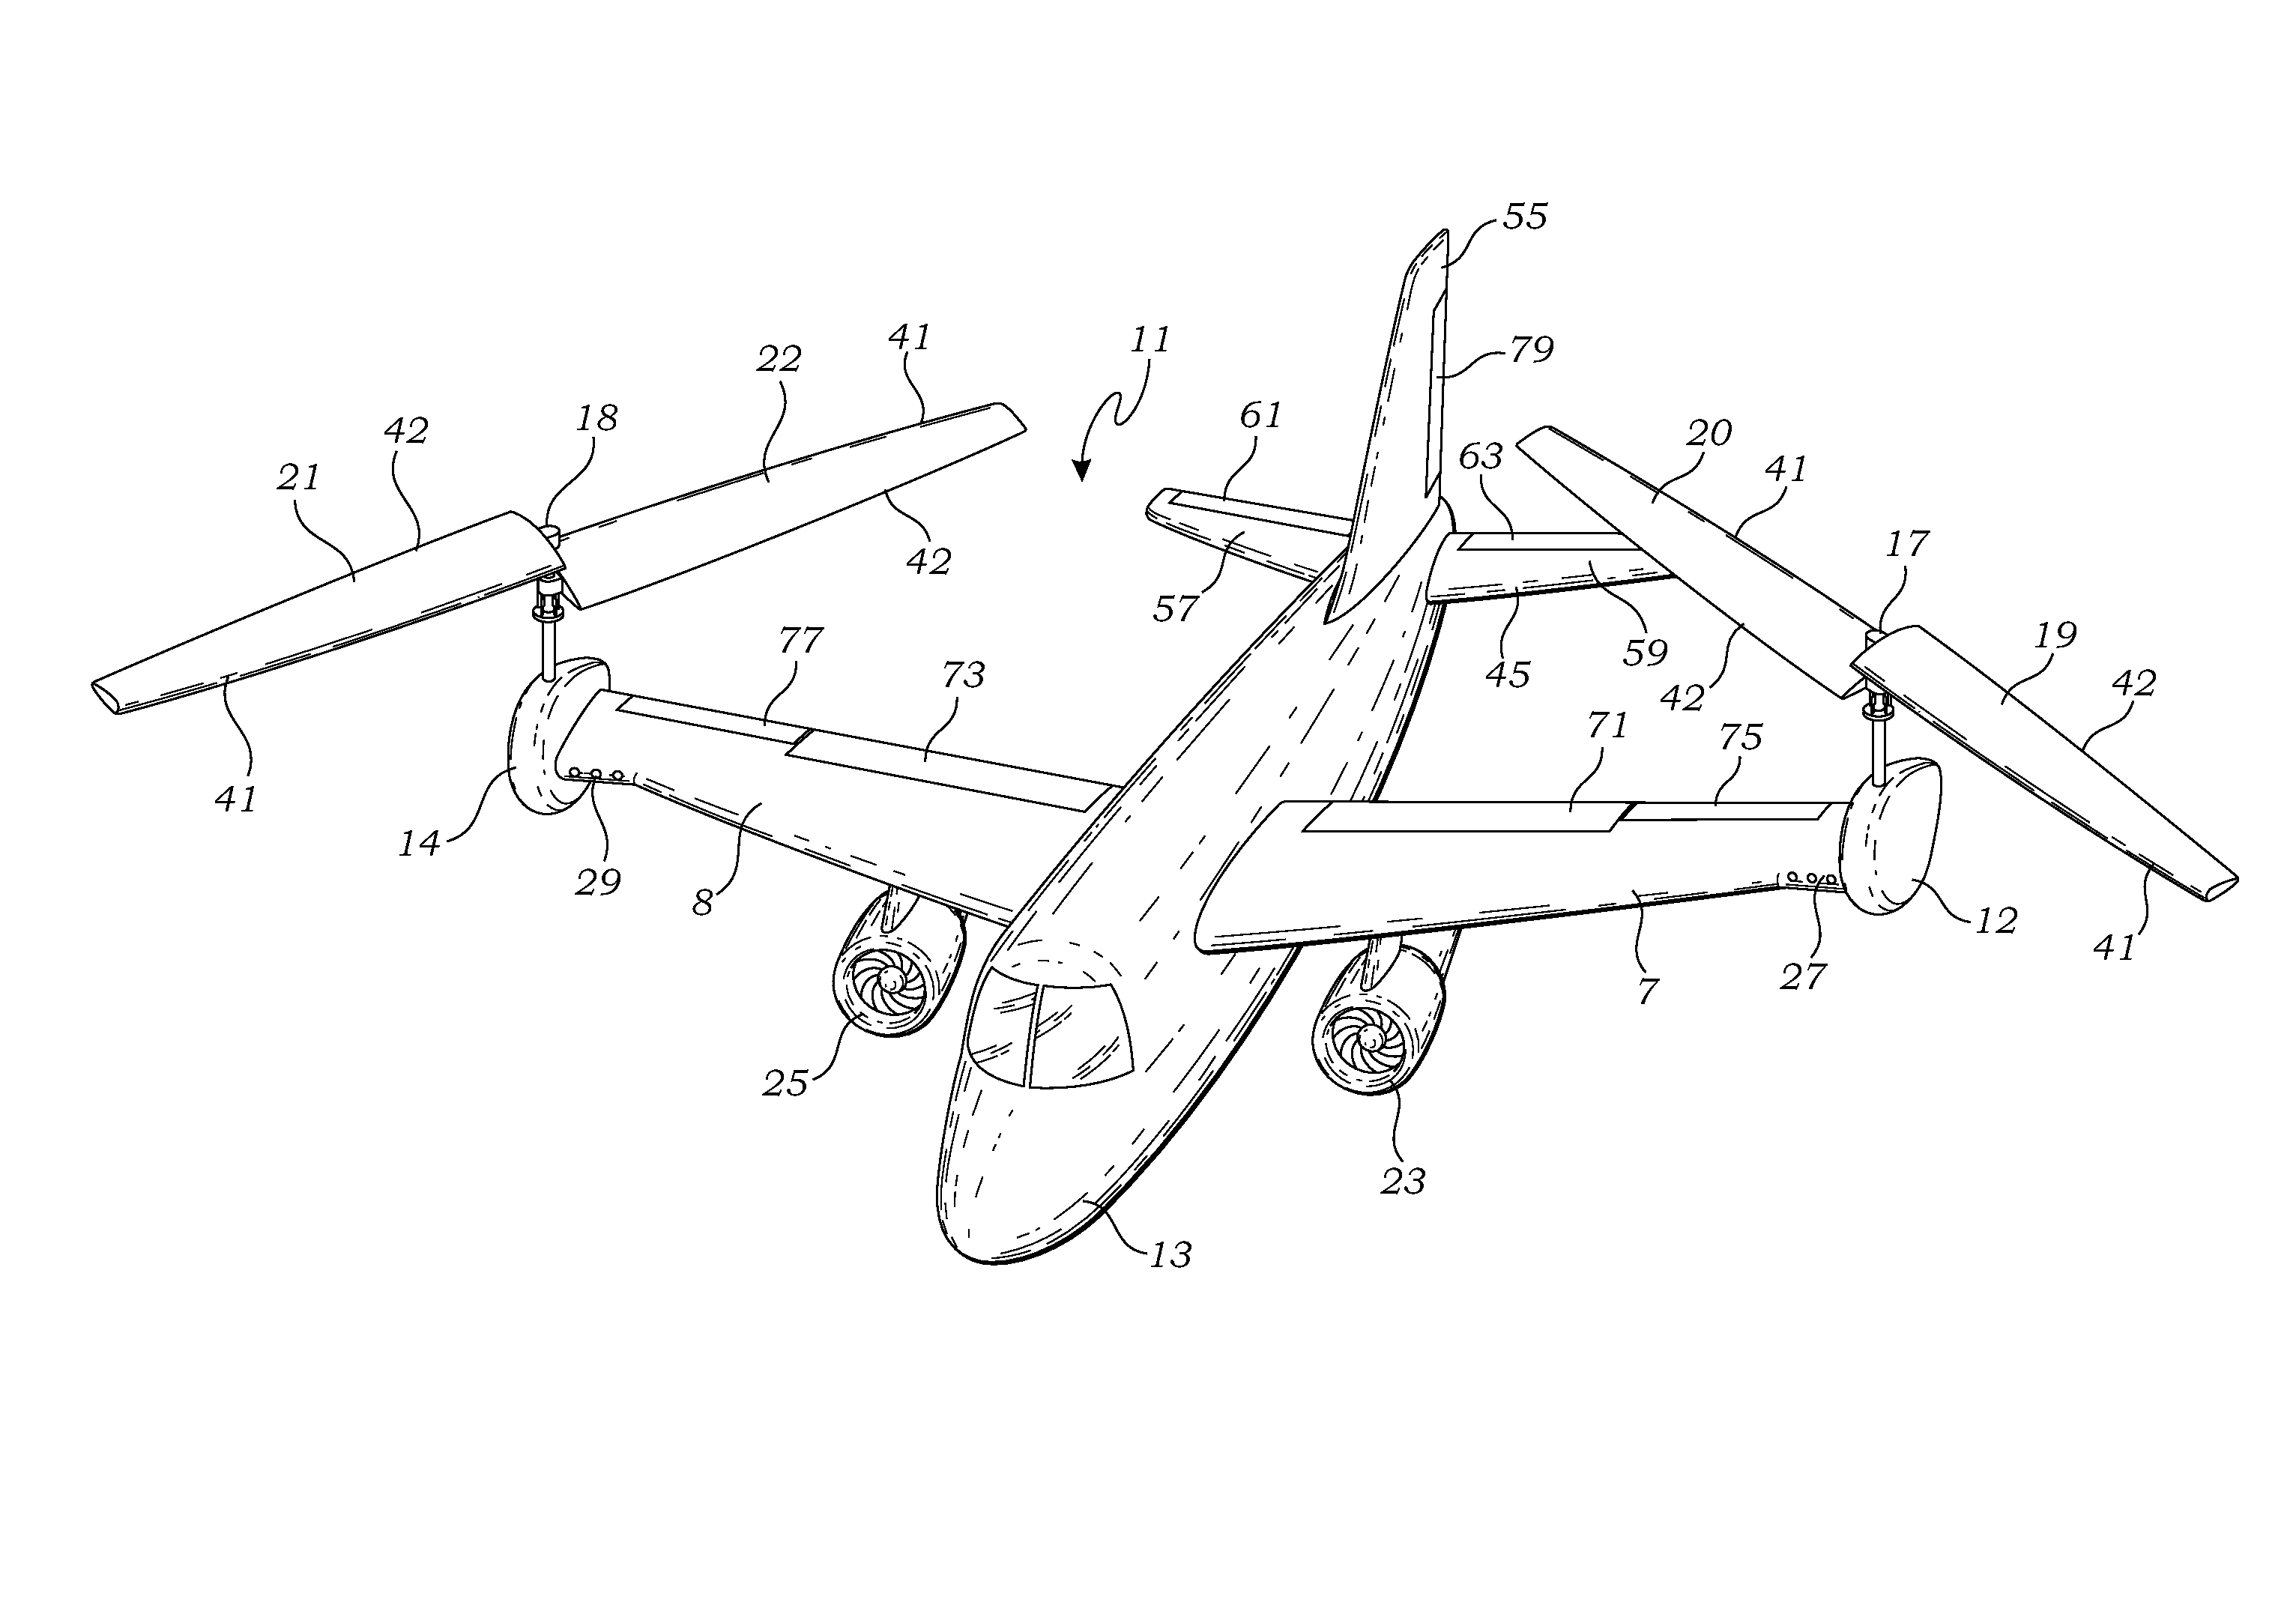 Rotor for a dual mode aircraft